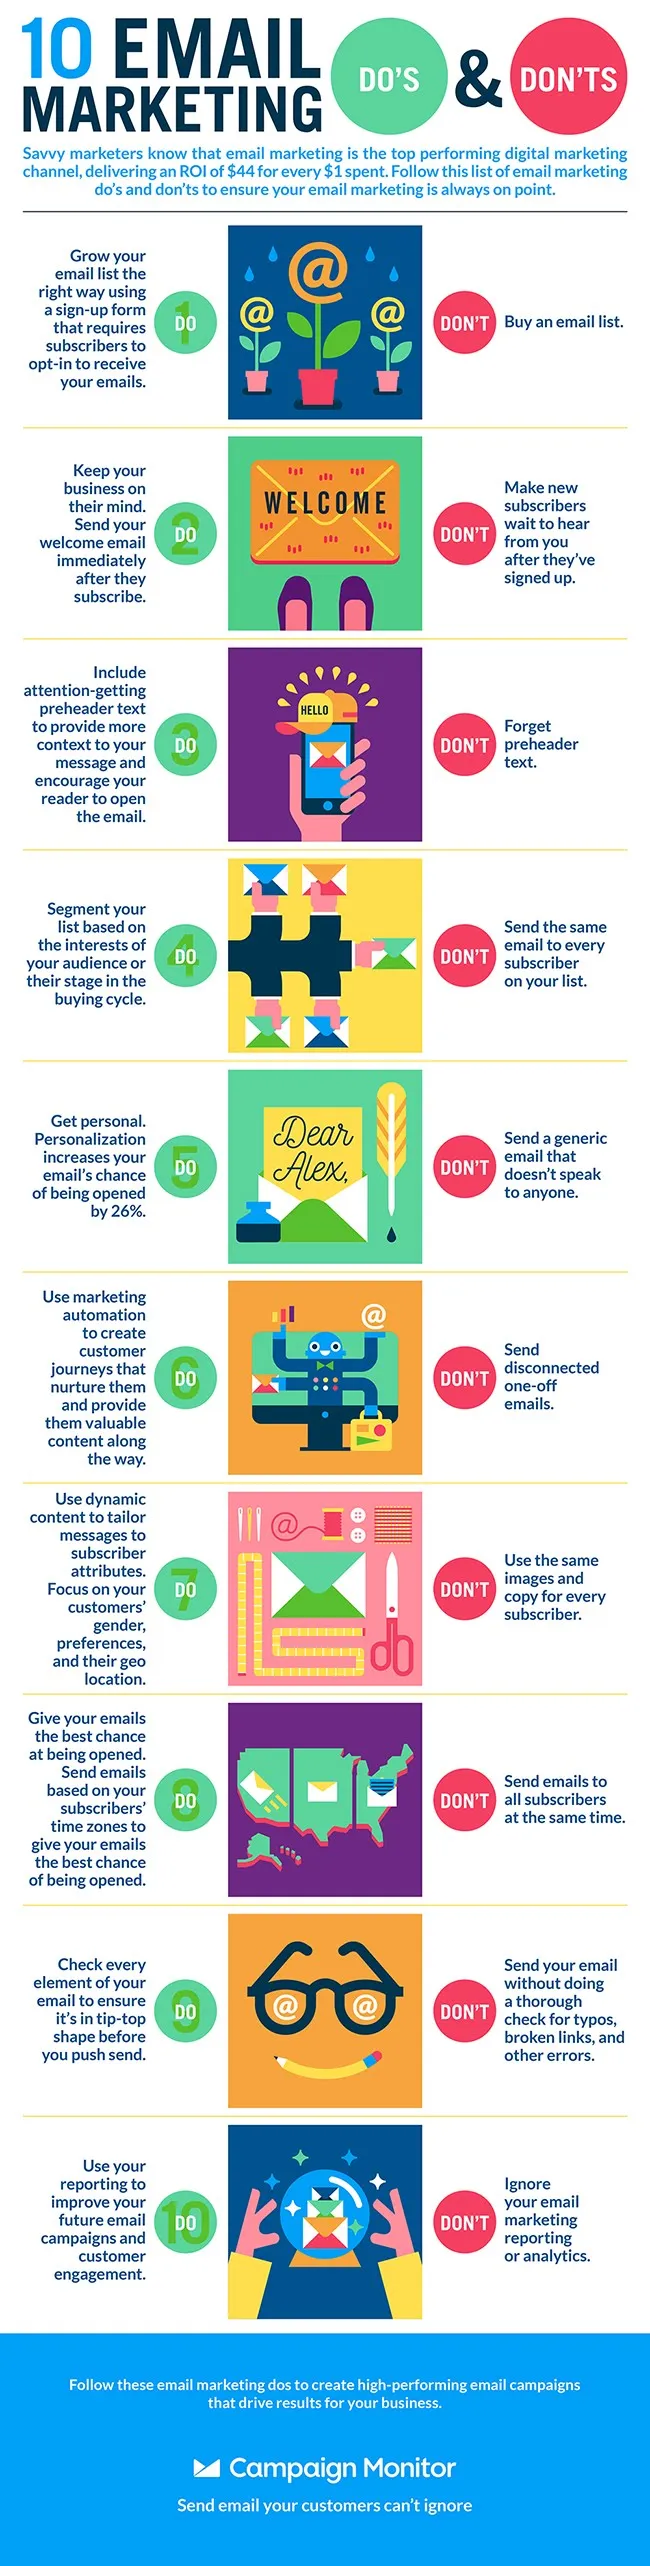 10 Email Marketing Do’s and Don’ts - #infographic